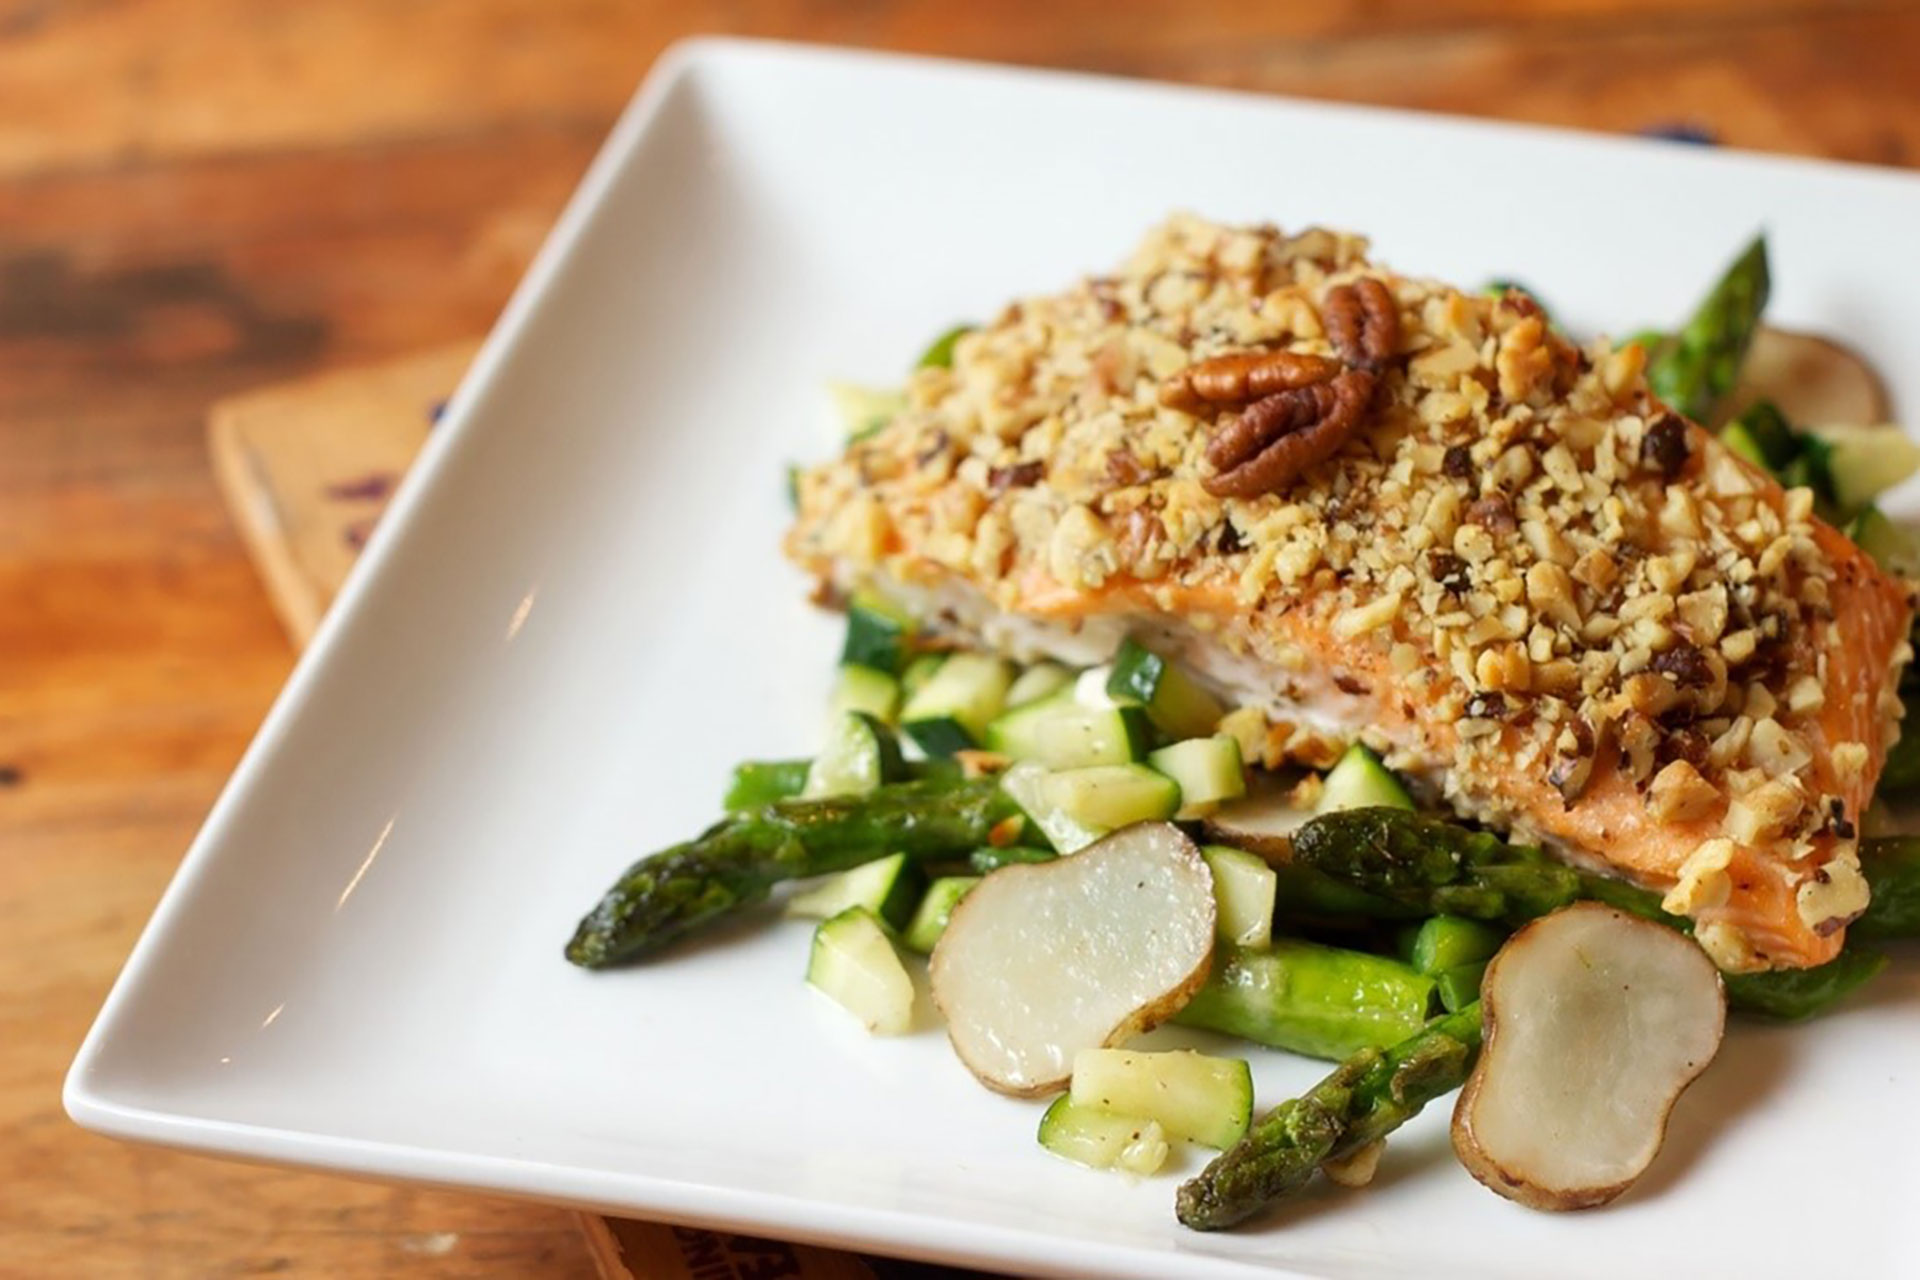 Parmesan and Pecan Crusted Salmon